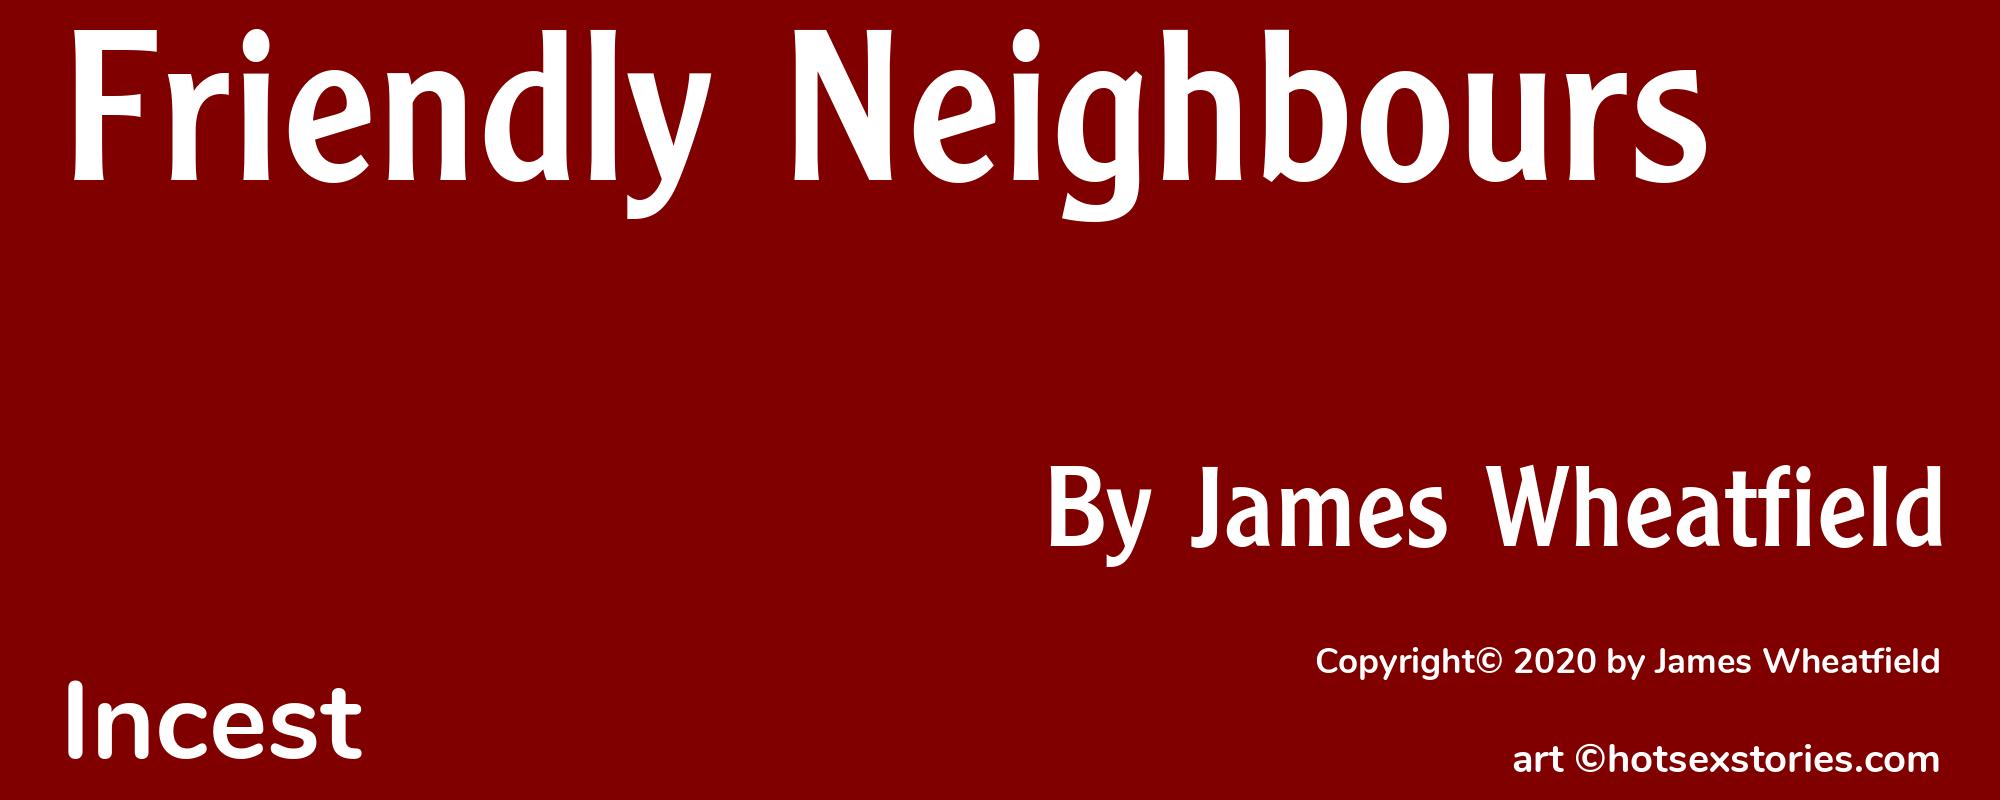 Friendly Neighbours - Cover